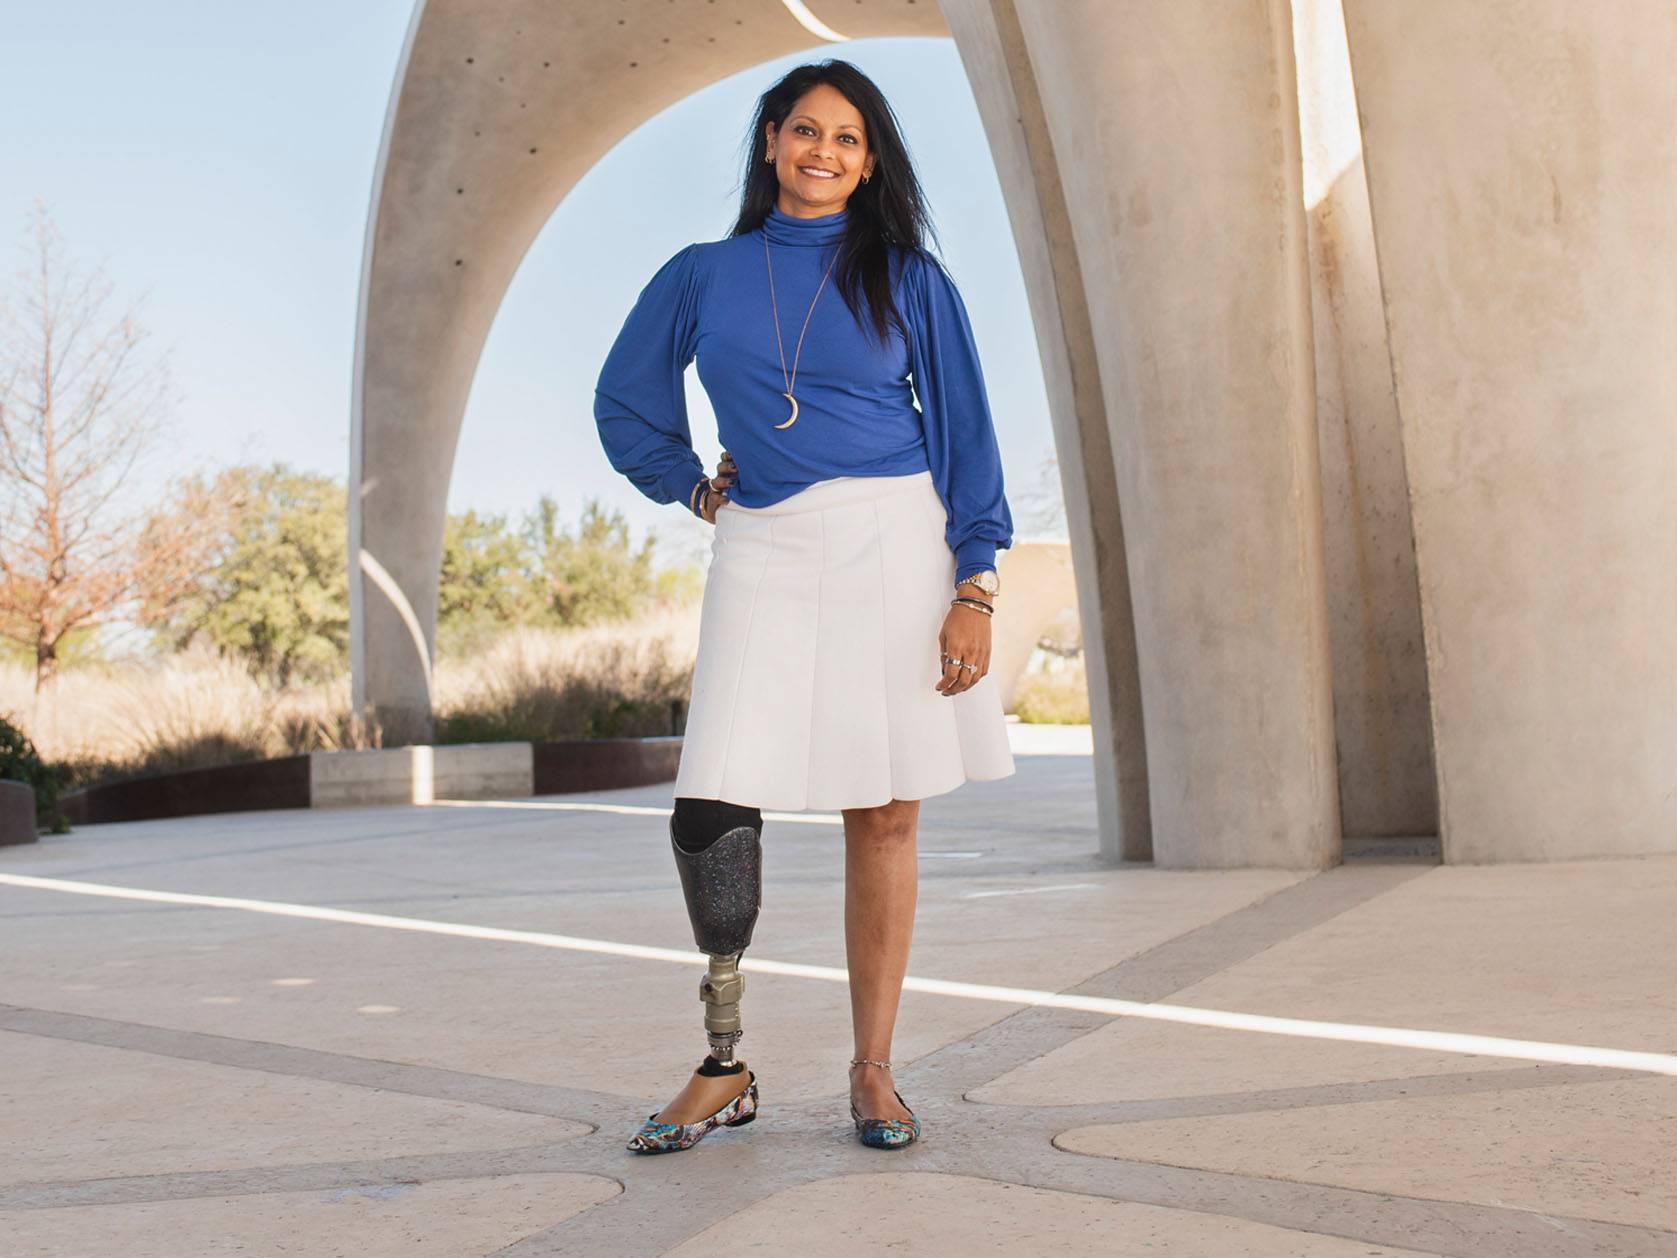 woman standing with leg prosthetic